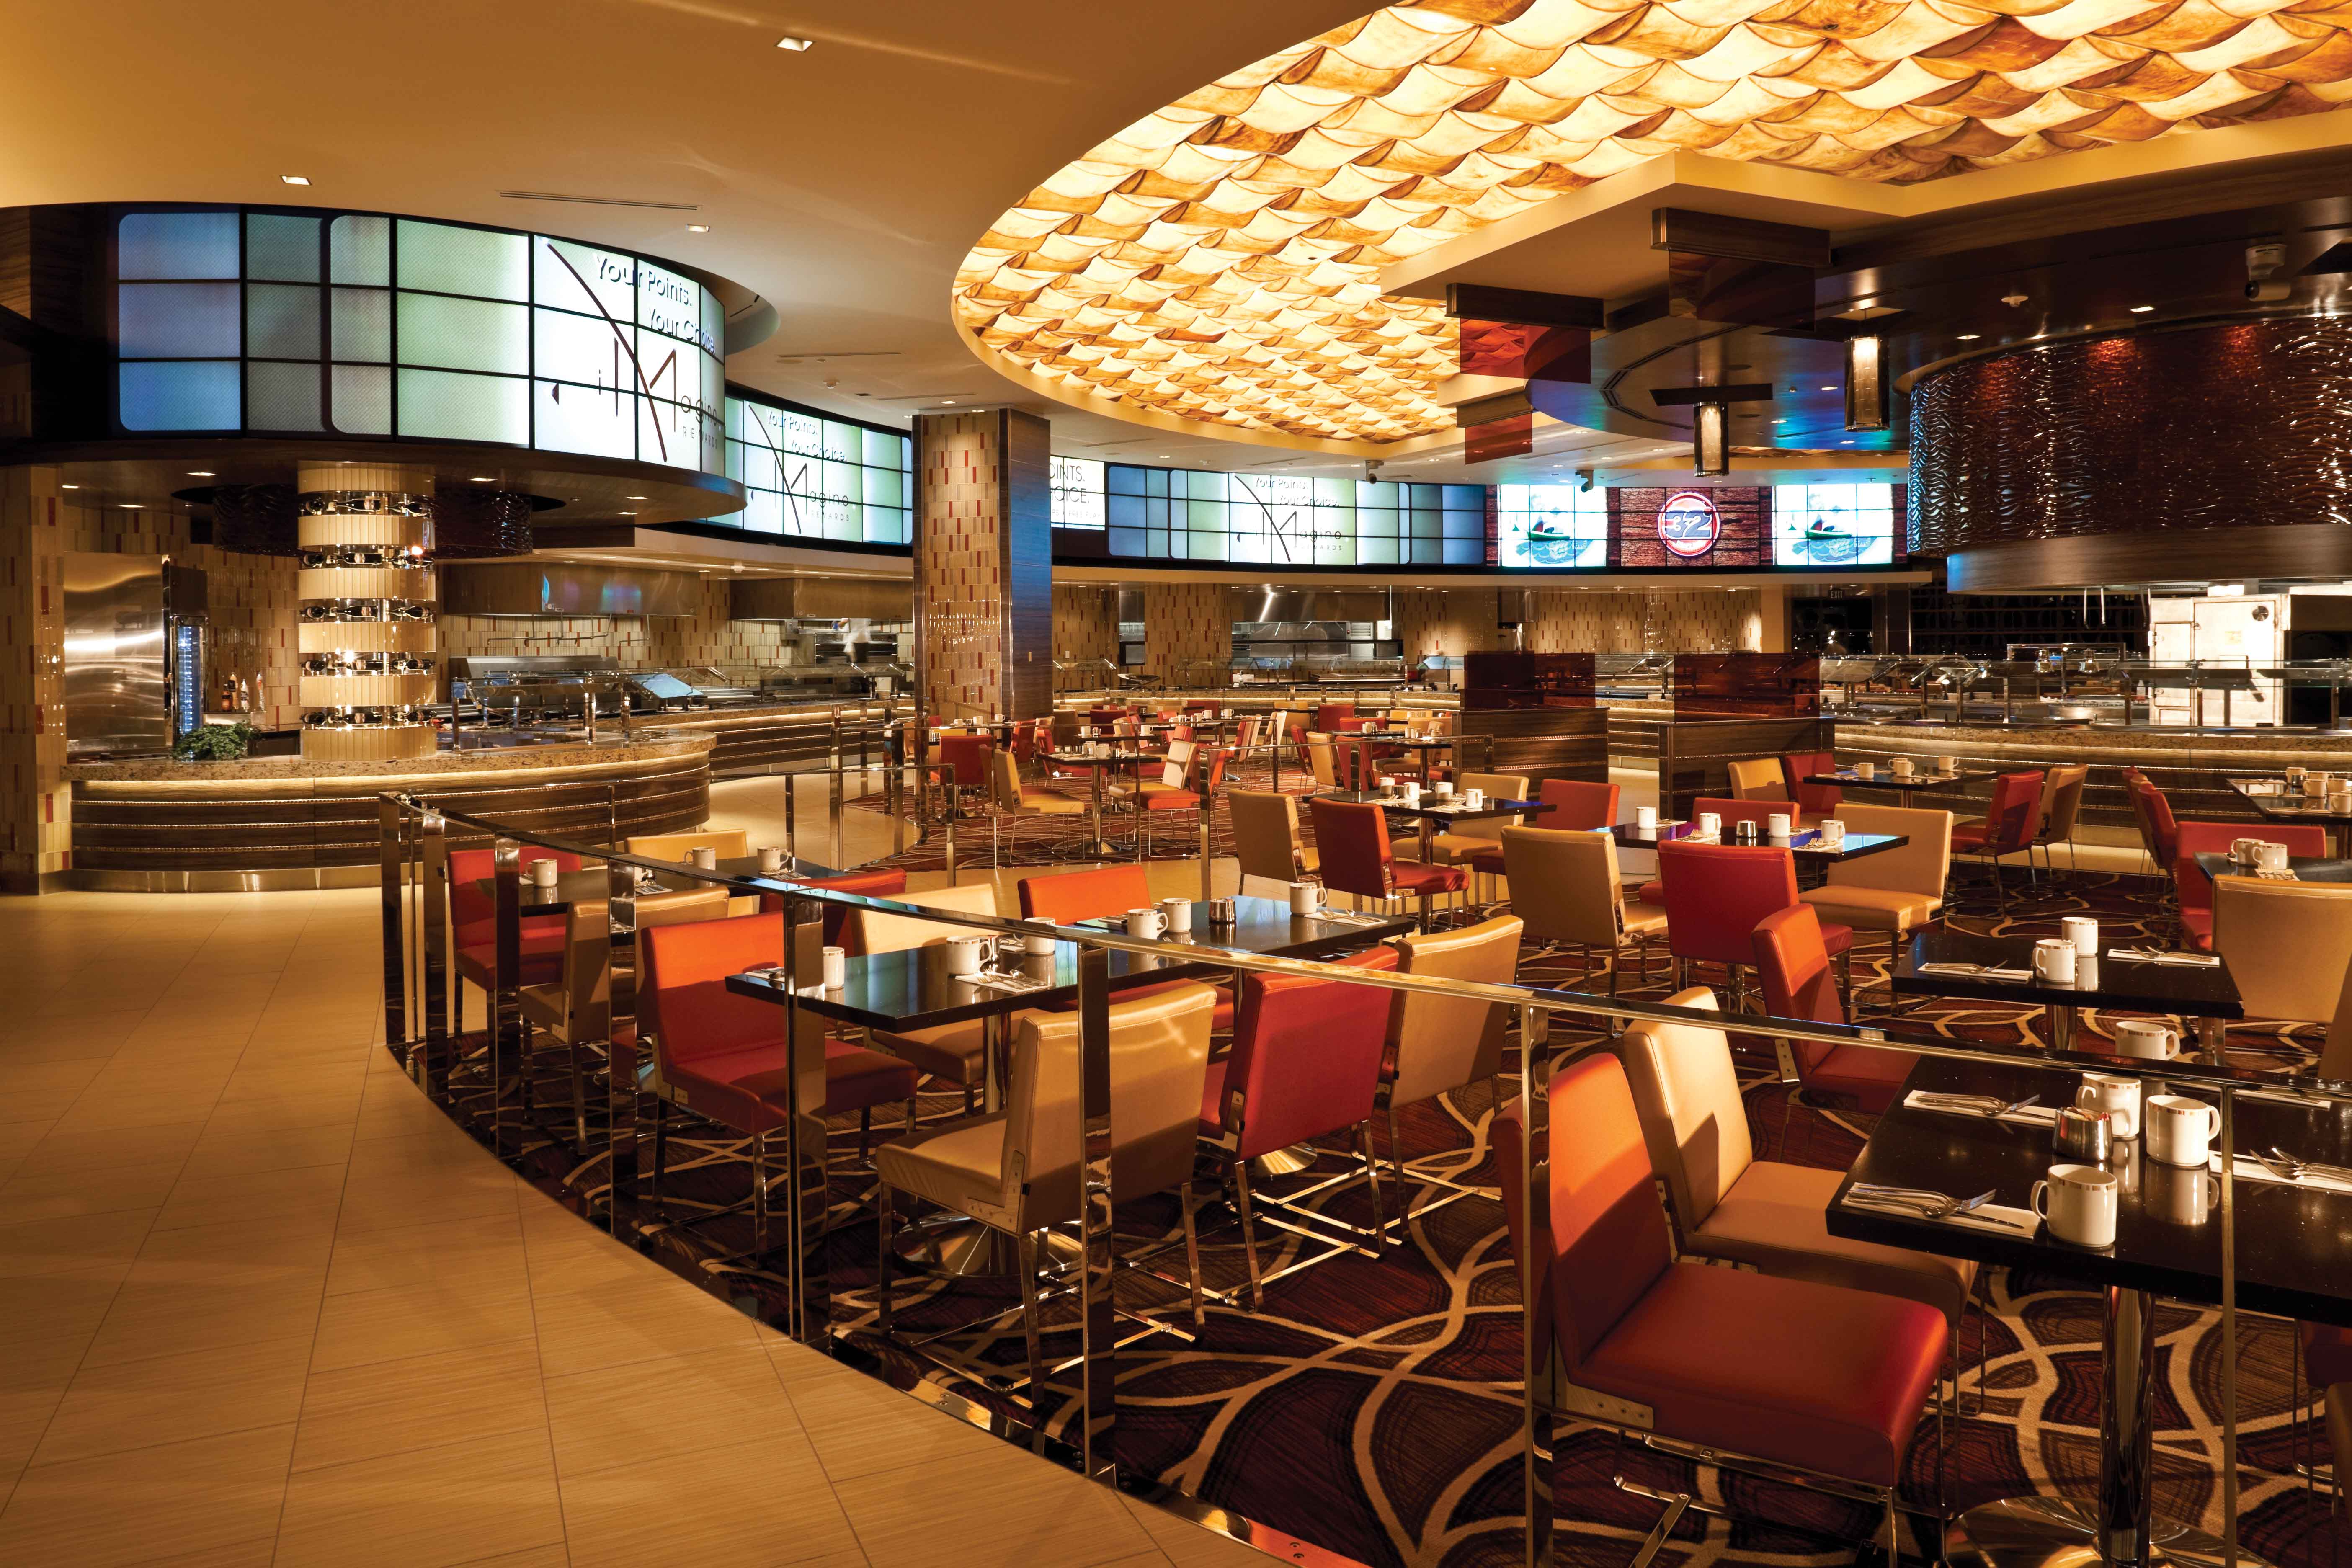 Studio B Buffet   by   Marnell Companies Industry-Leading Casino Architecture and Design Best Architect and Designer in Las Vegas, NV